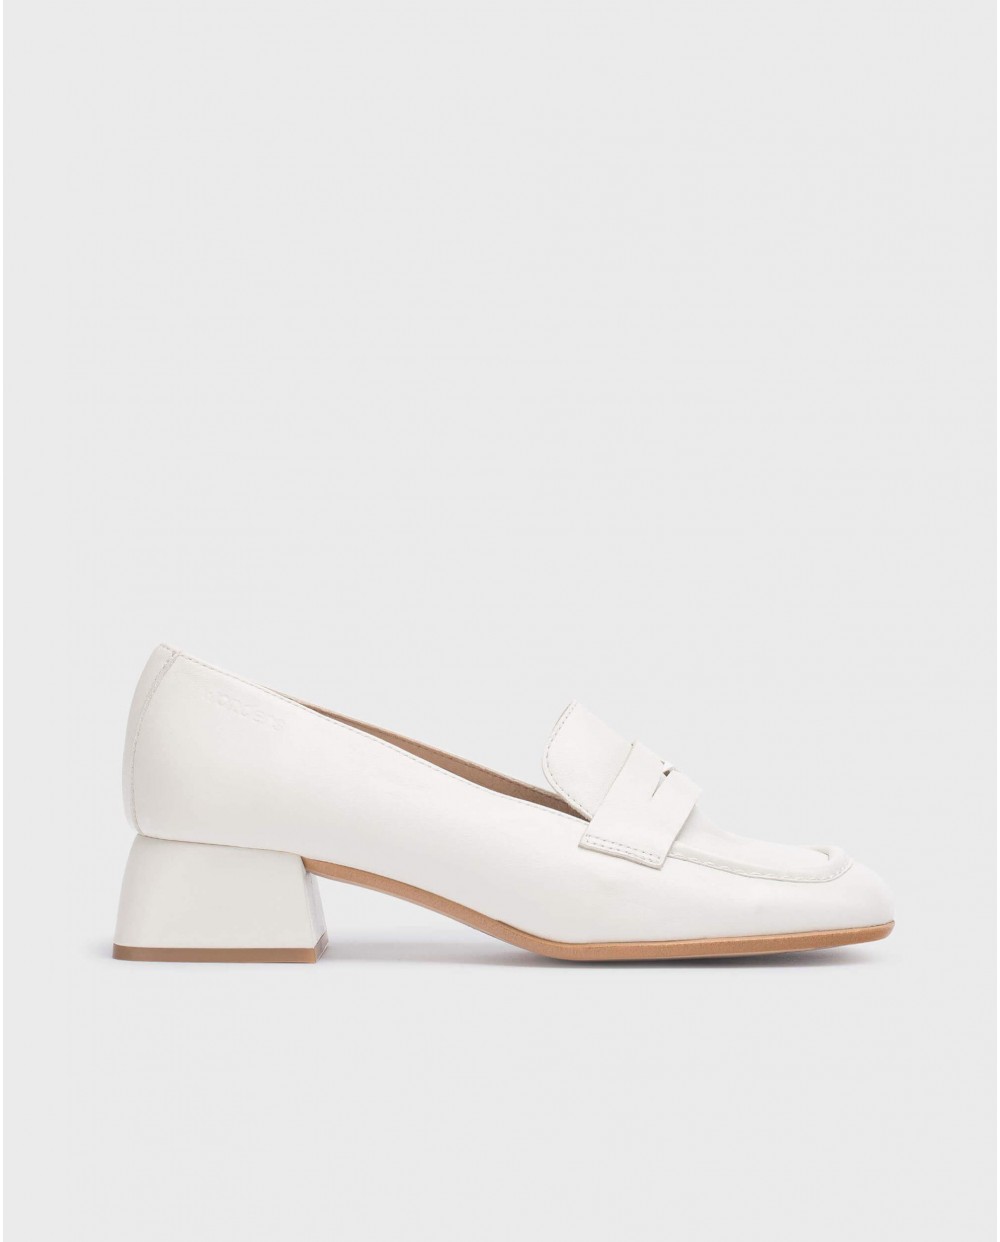 Wonders-Spring preview-White Gift moccasin